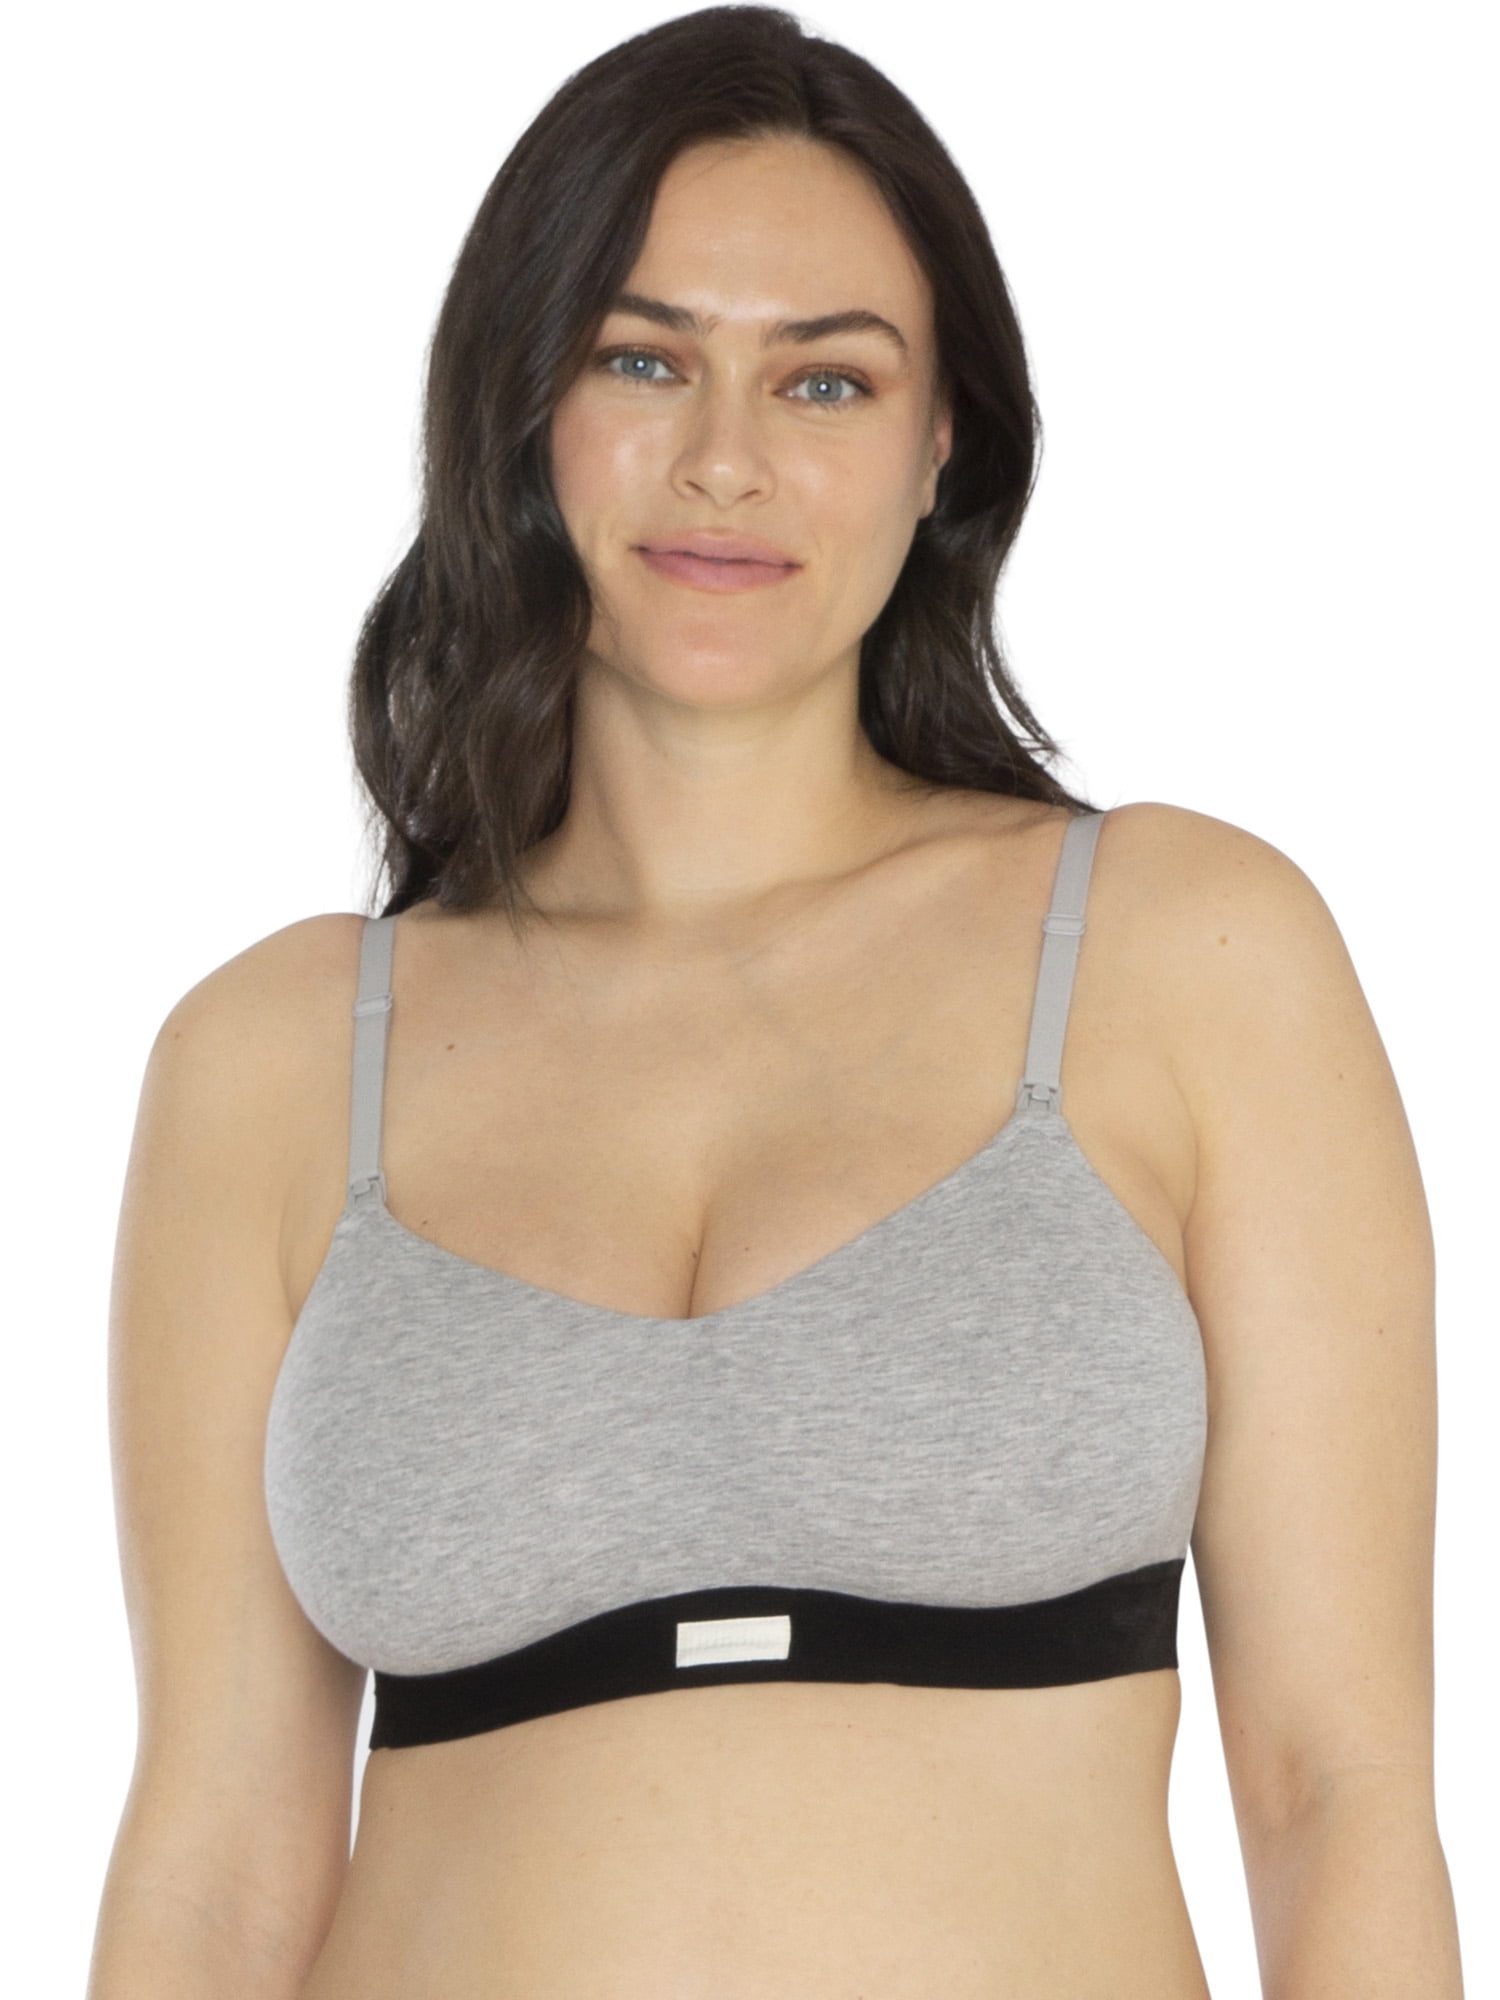 Kindly Yours Women's Cotton Spandex Maternity Nursing Wire-Free Bralette,  Sizes S to 3XL